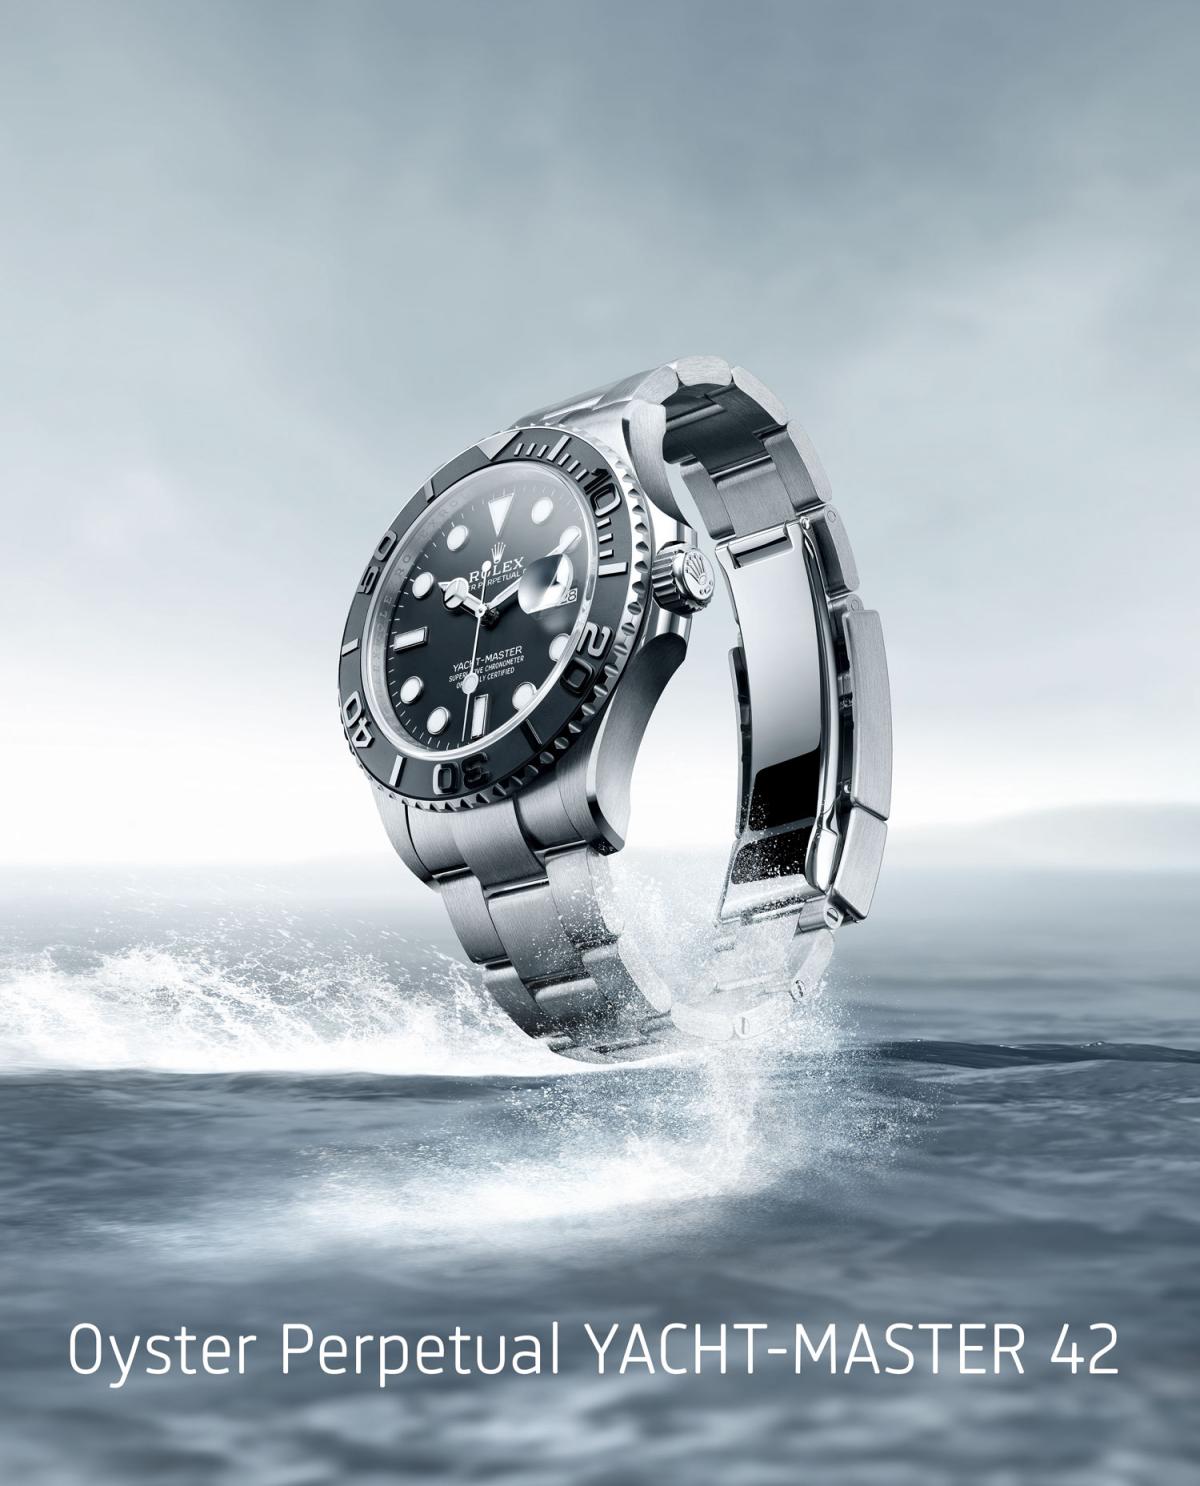 Oyster Perpetual YACHT-MASTER 42